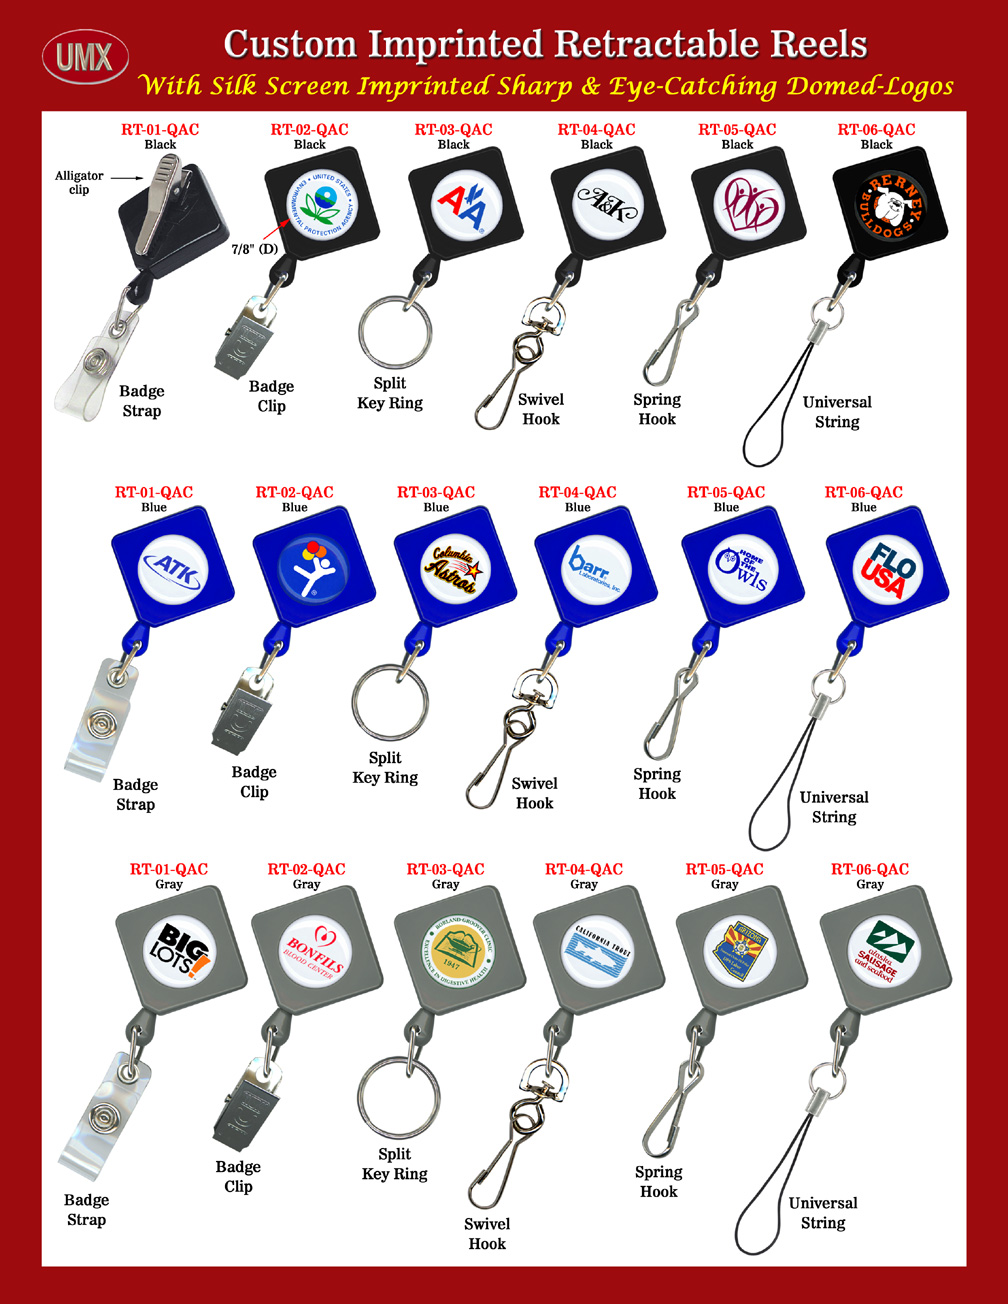 Unique Designed Customized Retractable ID Holders With Customized Themes and Imprints. 